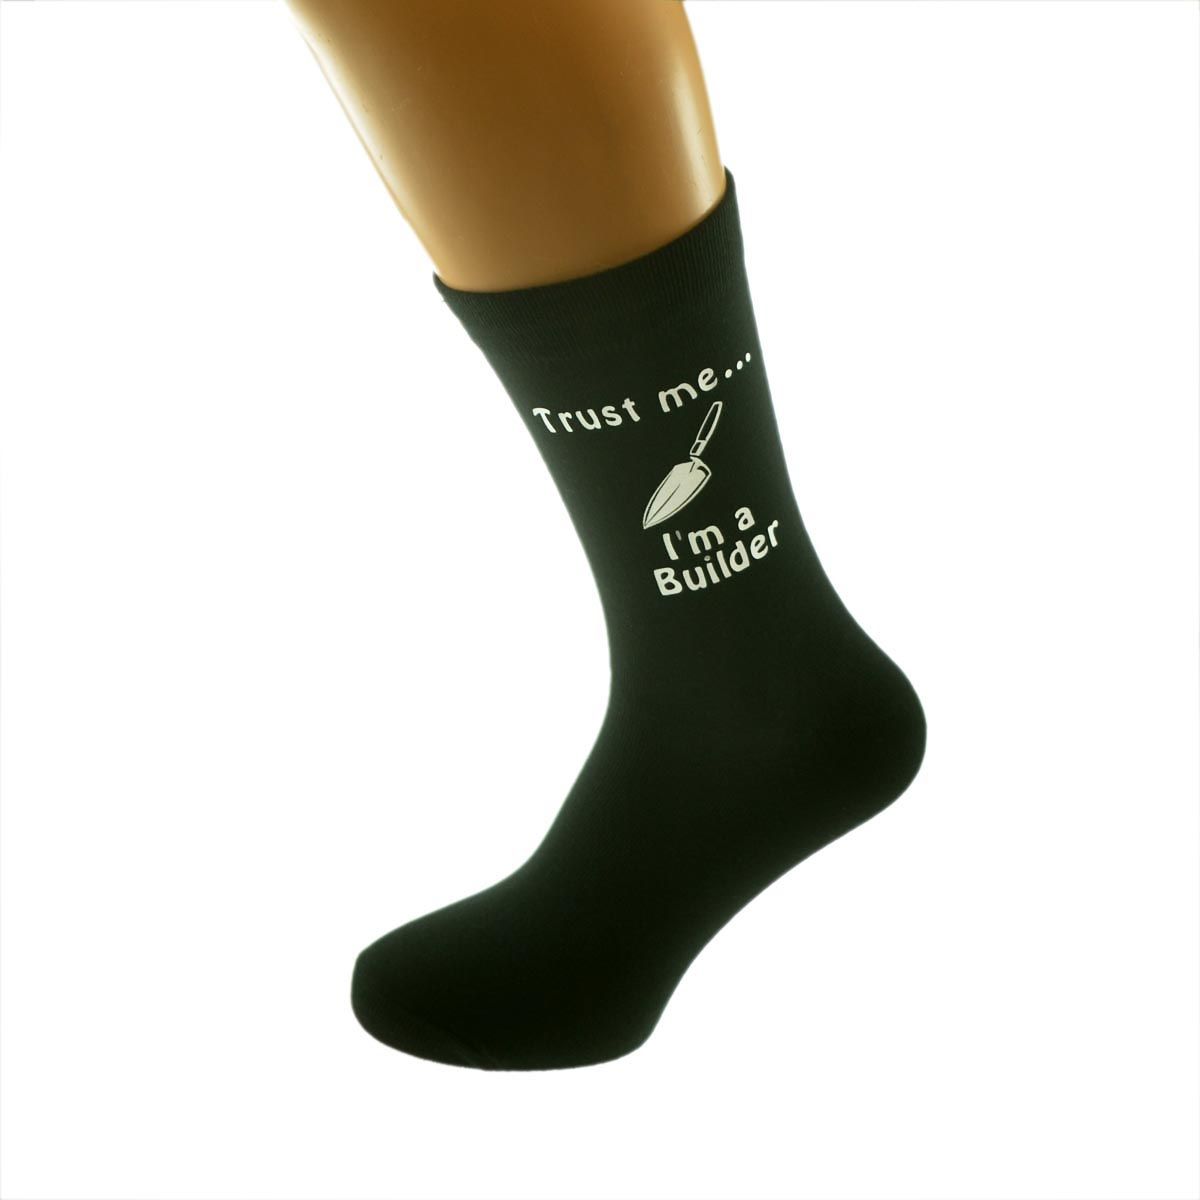 Trust me I'm a Builder with Trowel Image Mens Black Socks - Ashton and Finch